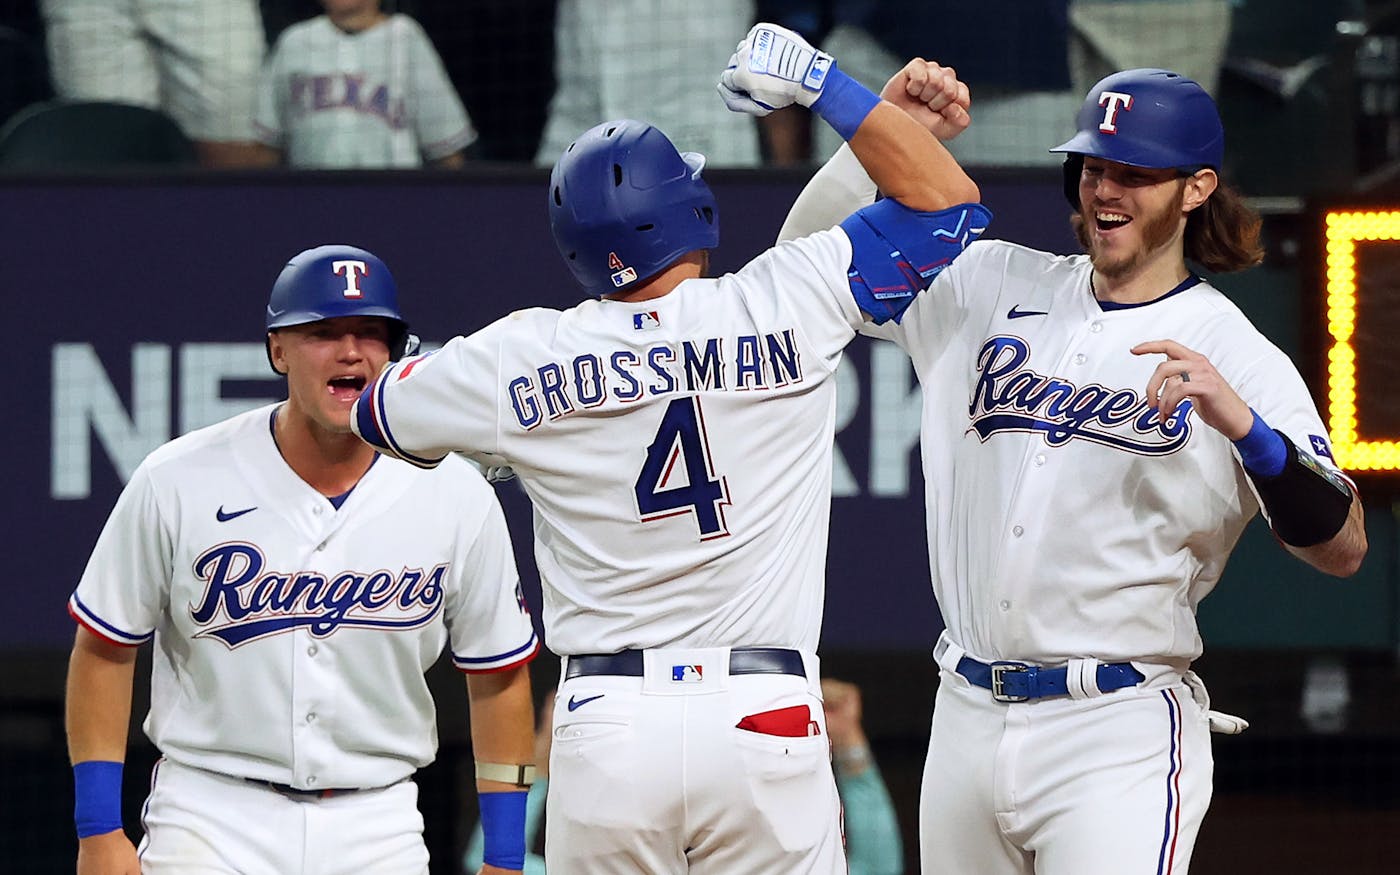 As the Texas Rangers Rebuild, Prospects for the 2019 Season Are